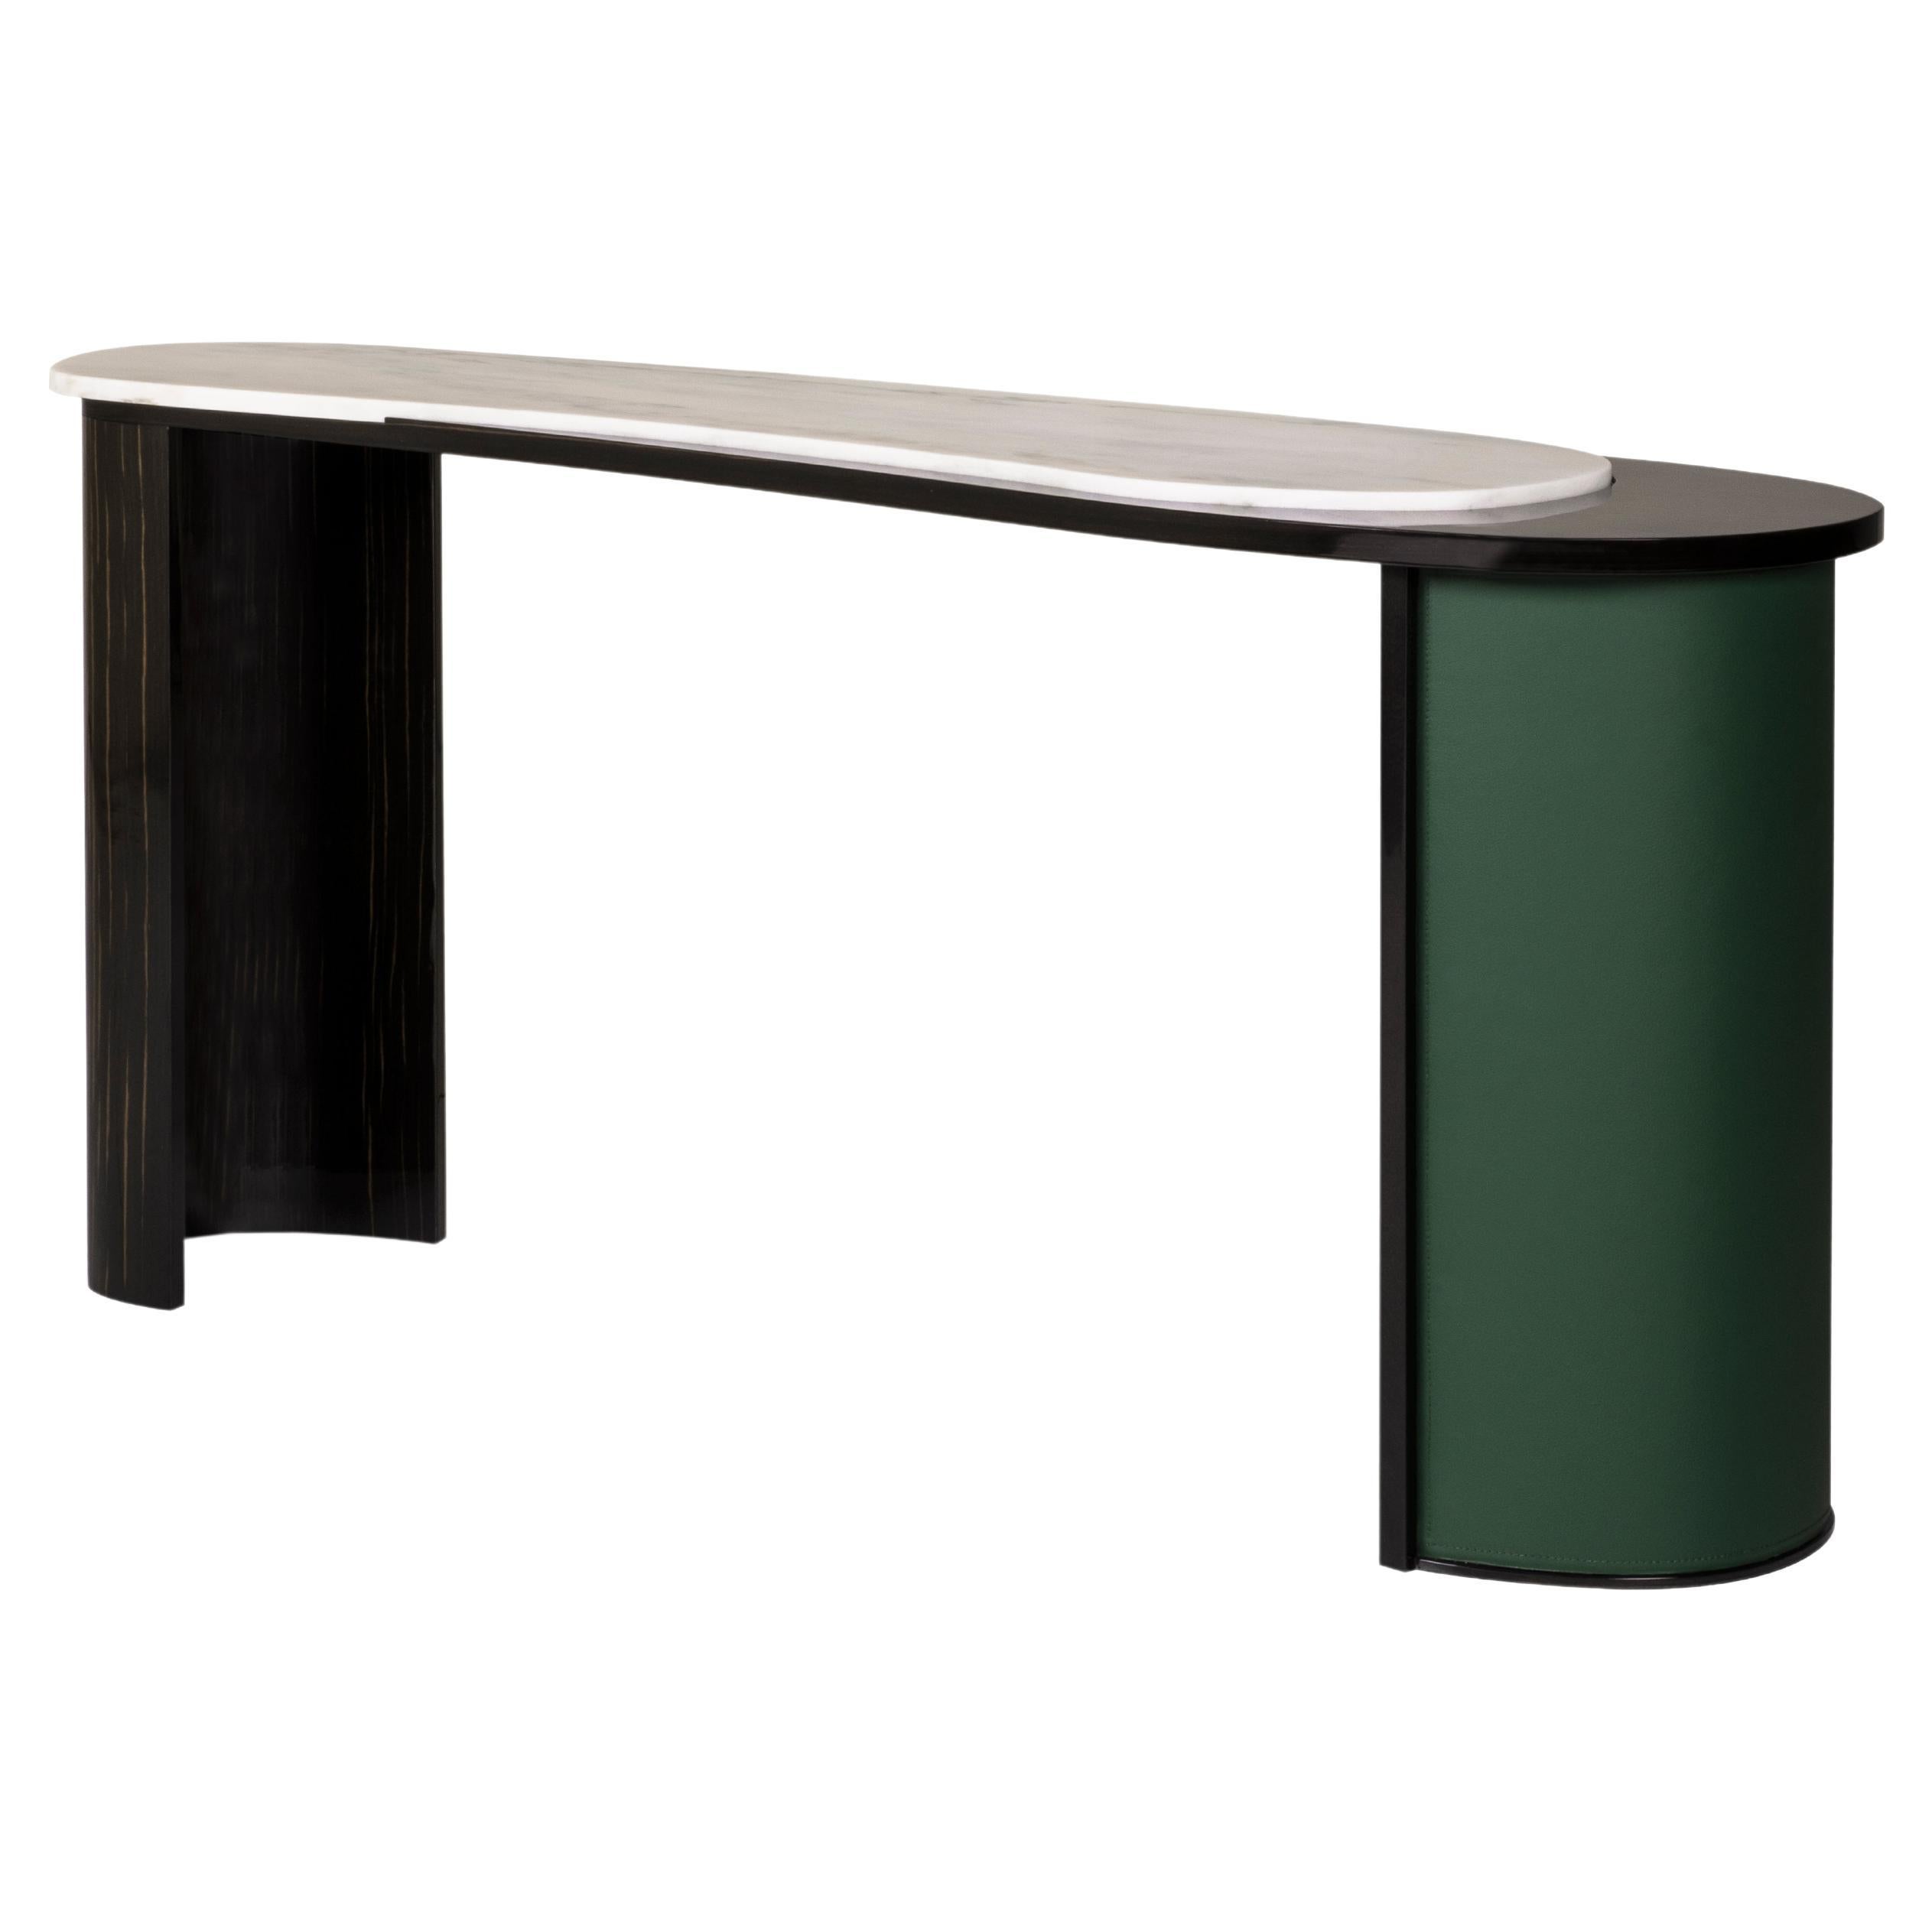 Contemporary Modern Castelo Console with Calacatta Bianco Marble by Greenapple